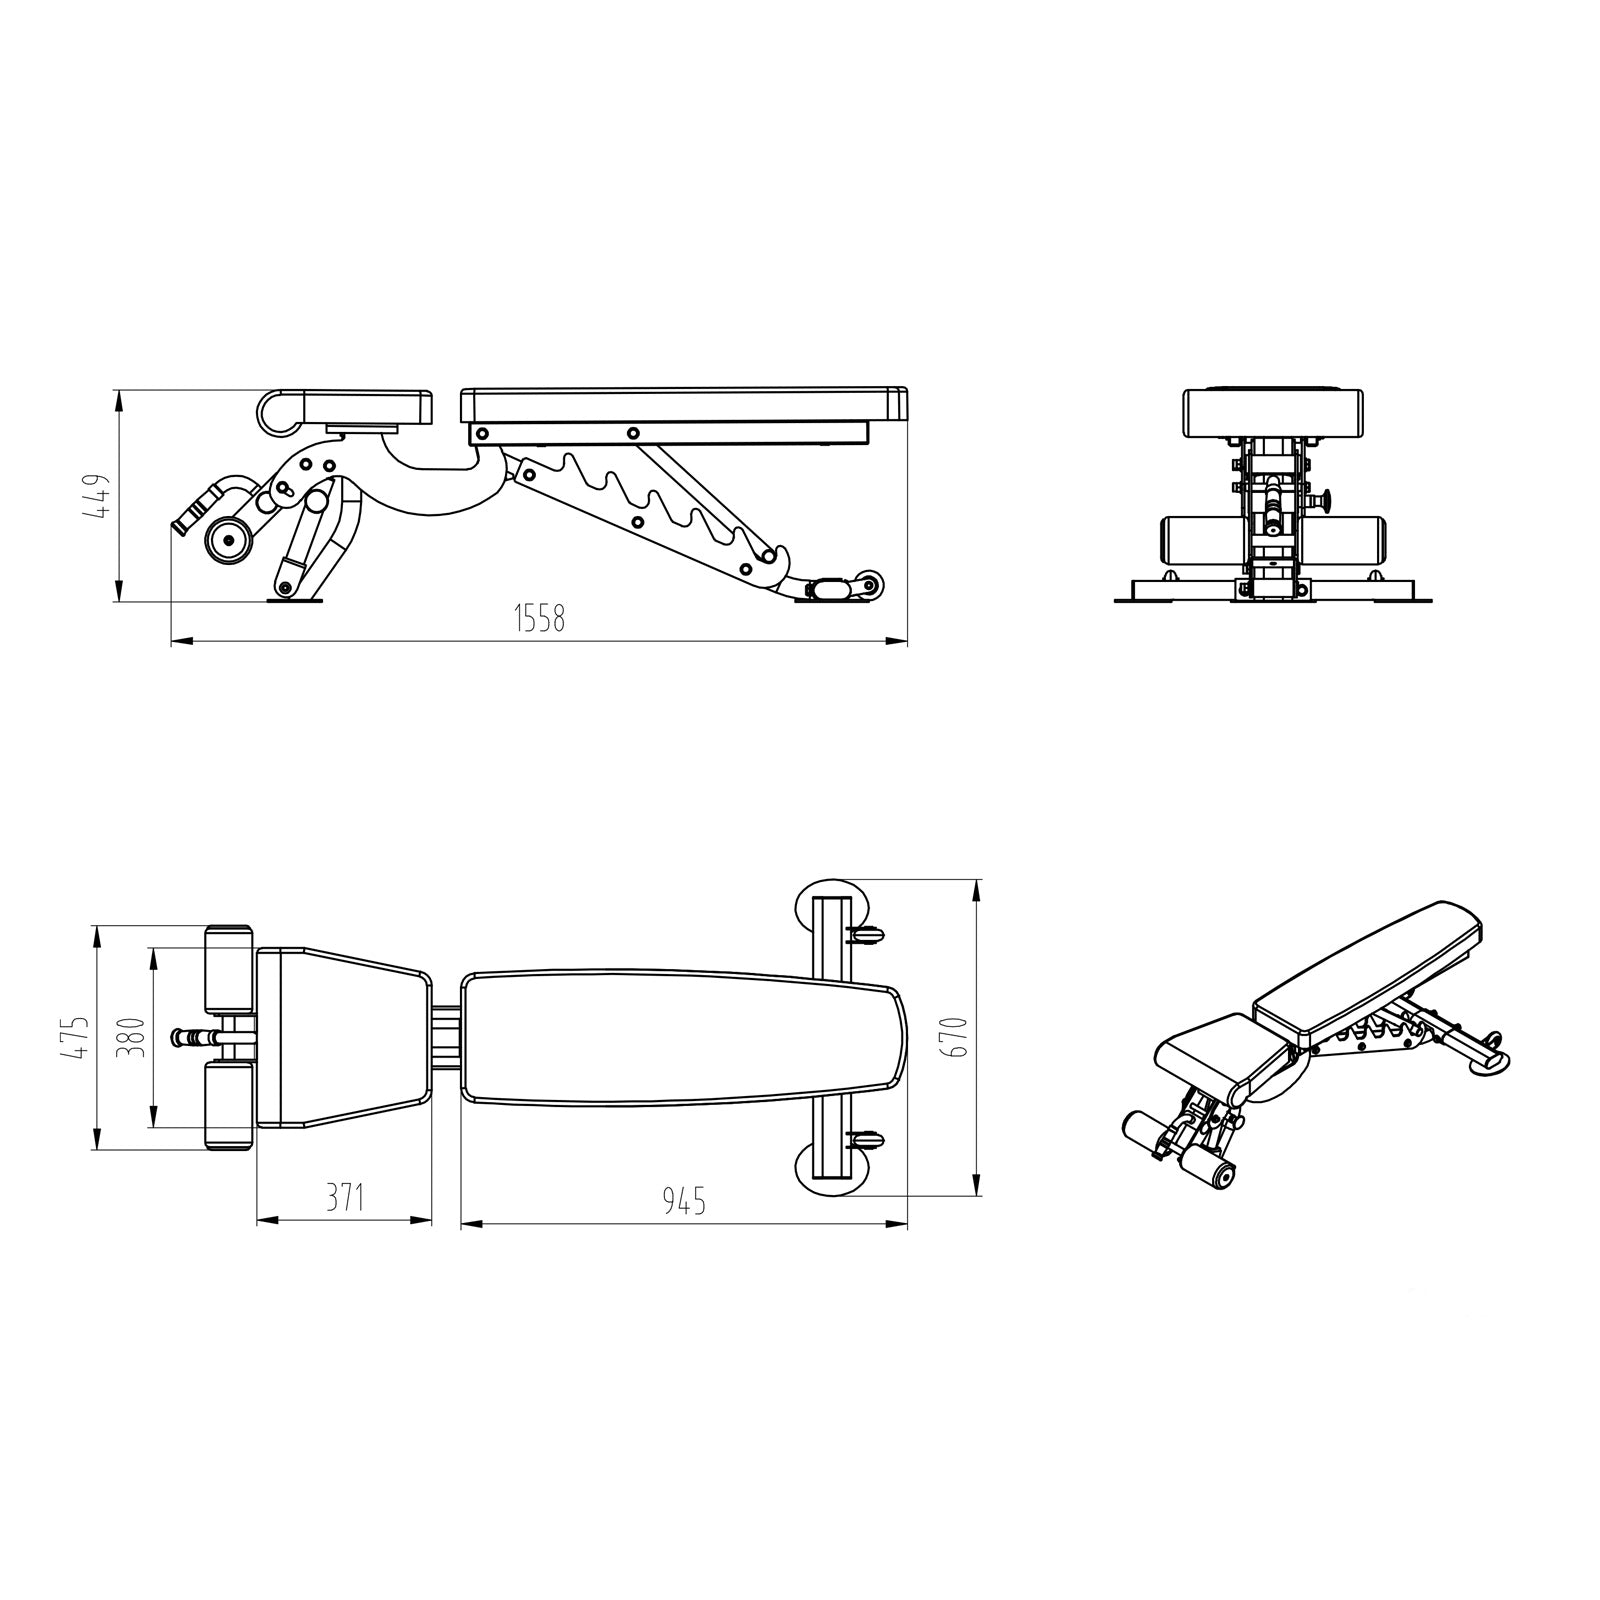 a diagram and dimensions of a adjustable weight bench with foot support